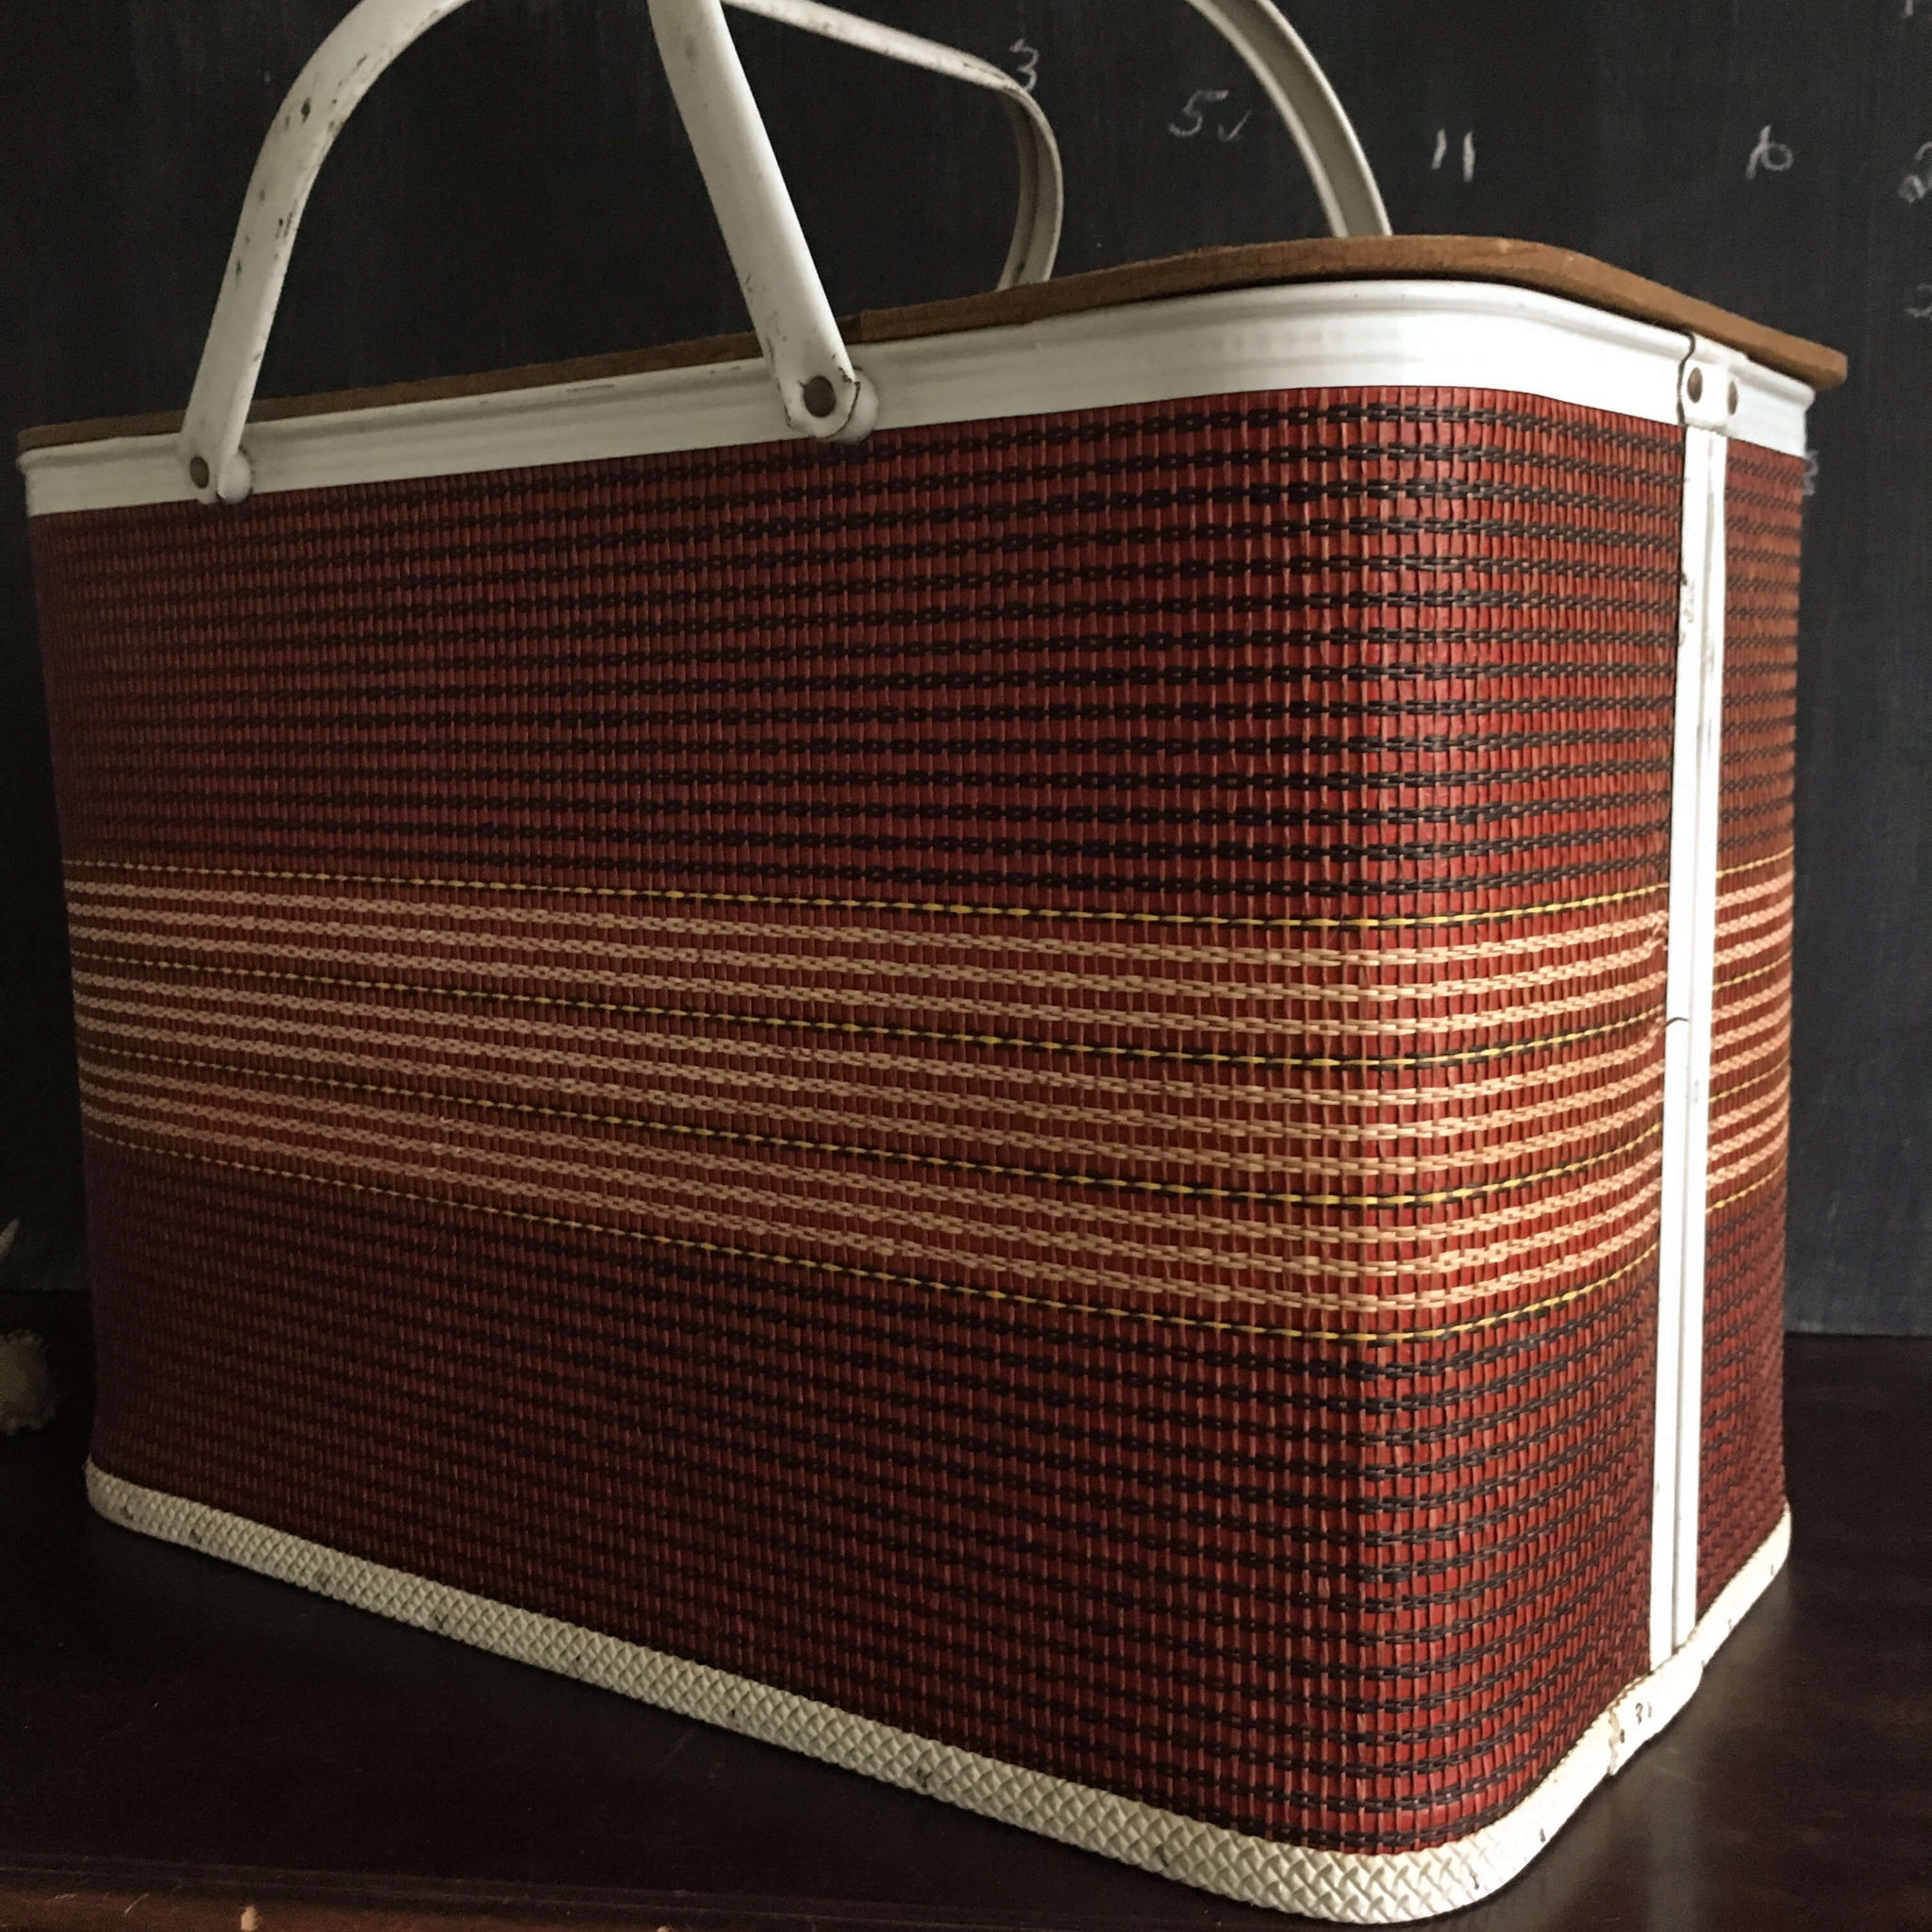 Vintage 1960s Redmon Picnic Basket - Large Red and Beige Striped Basket Loom Woven with Metal Handles